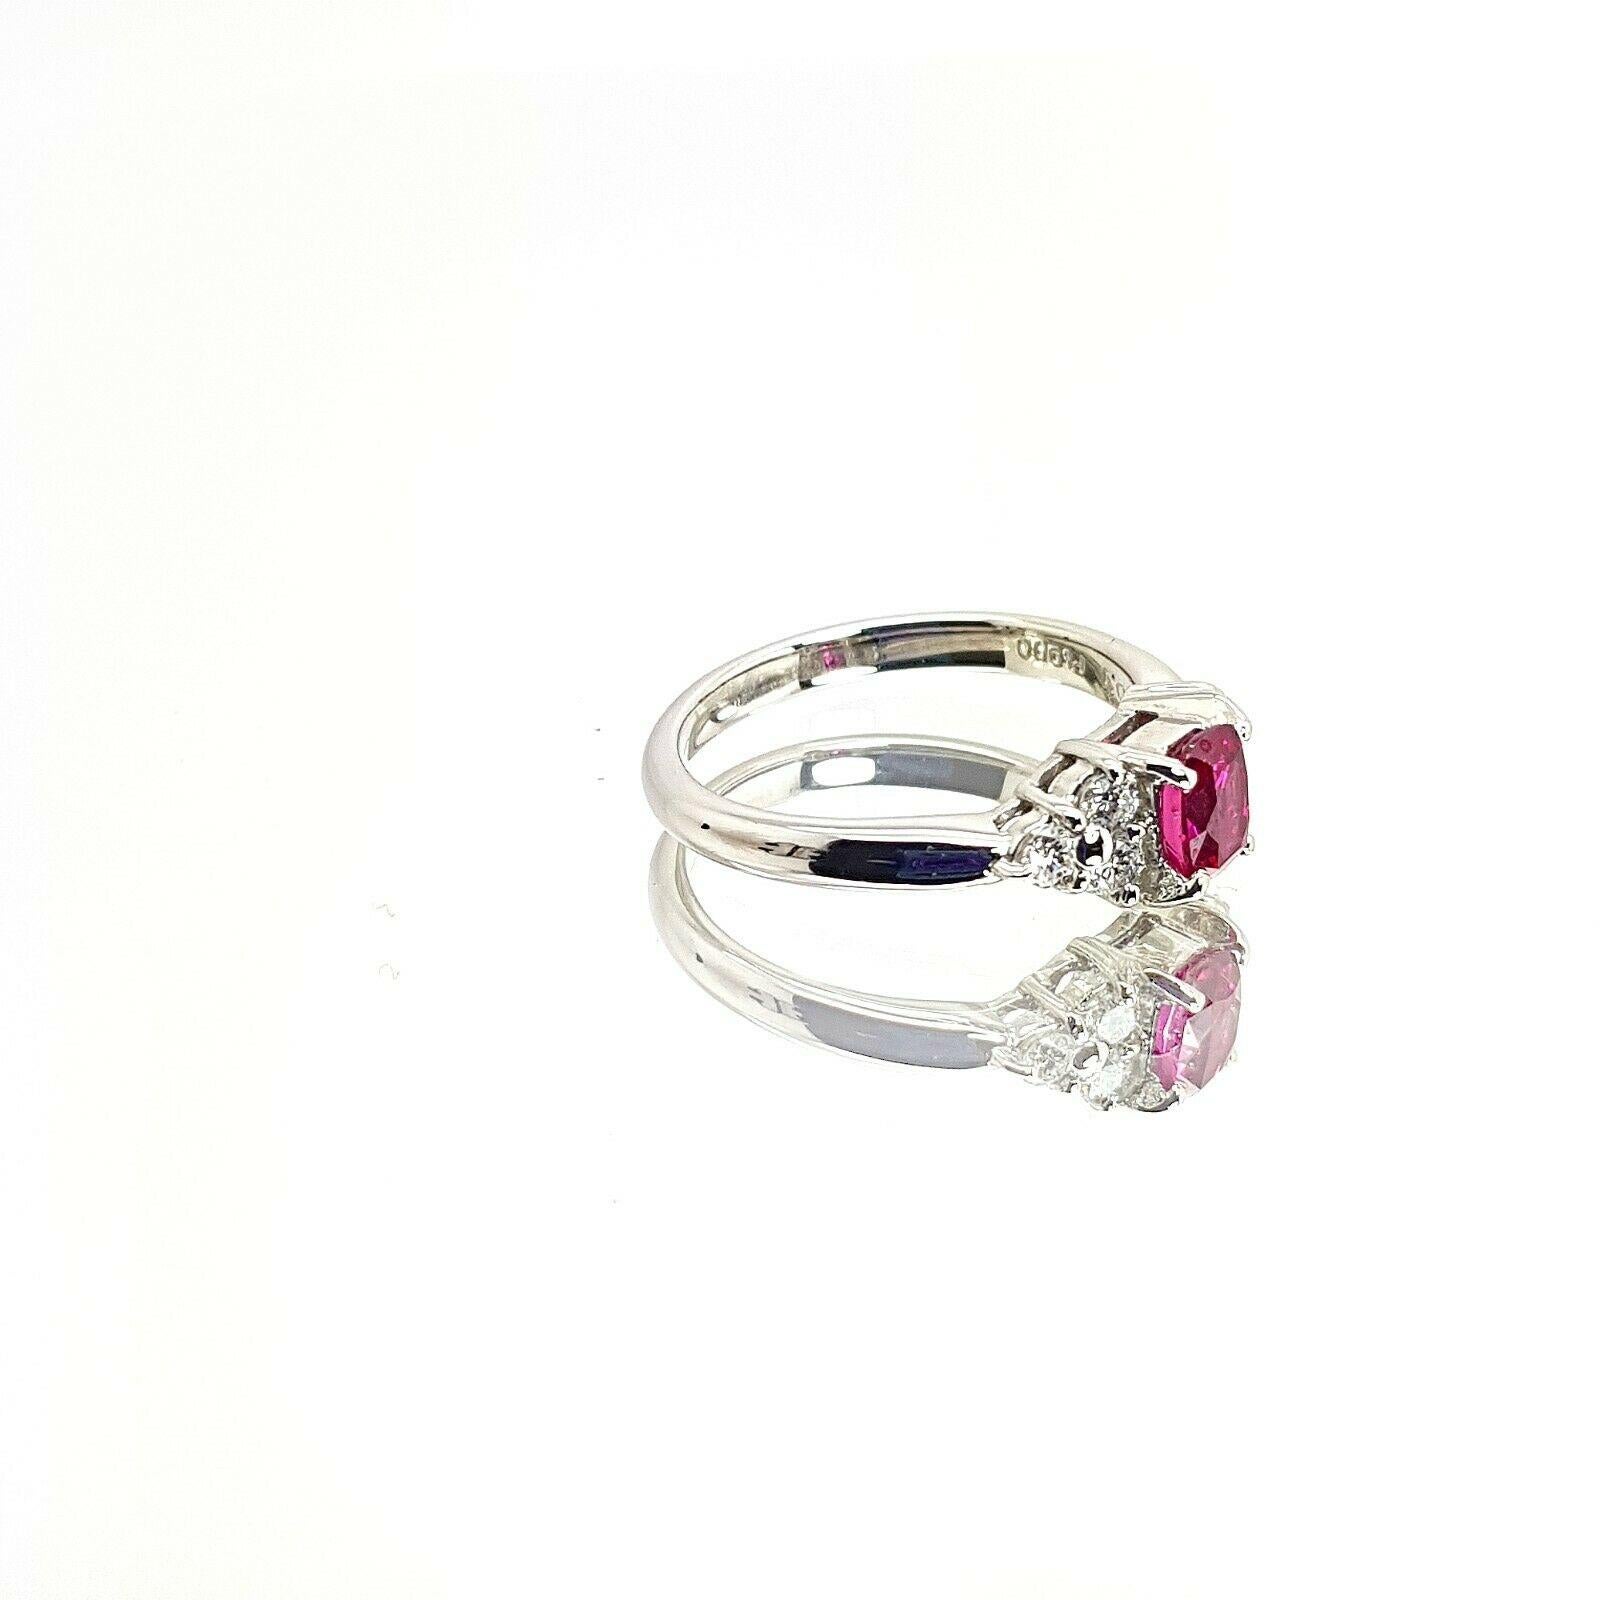 Oval Cut Ruby and Diamond Art Deco Style Ring